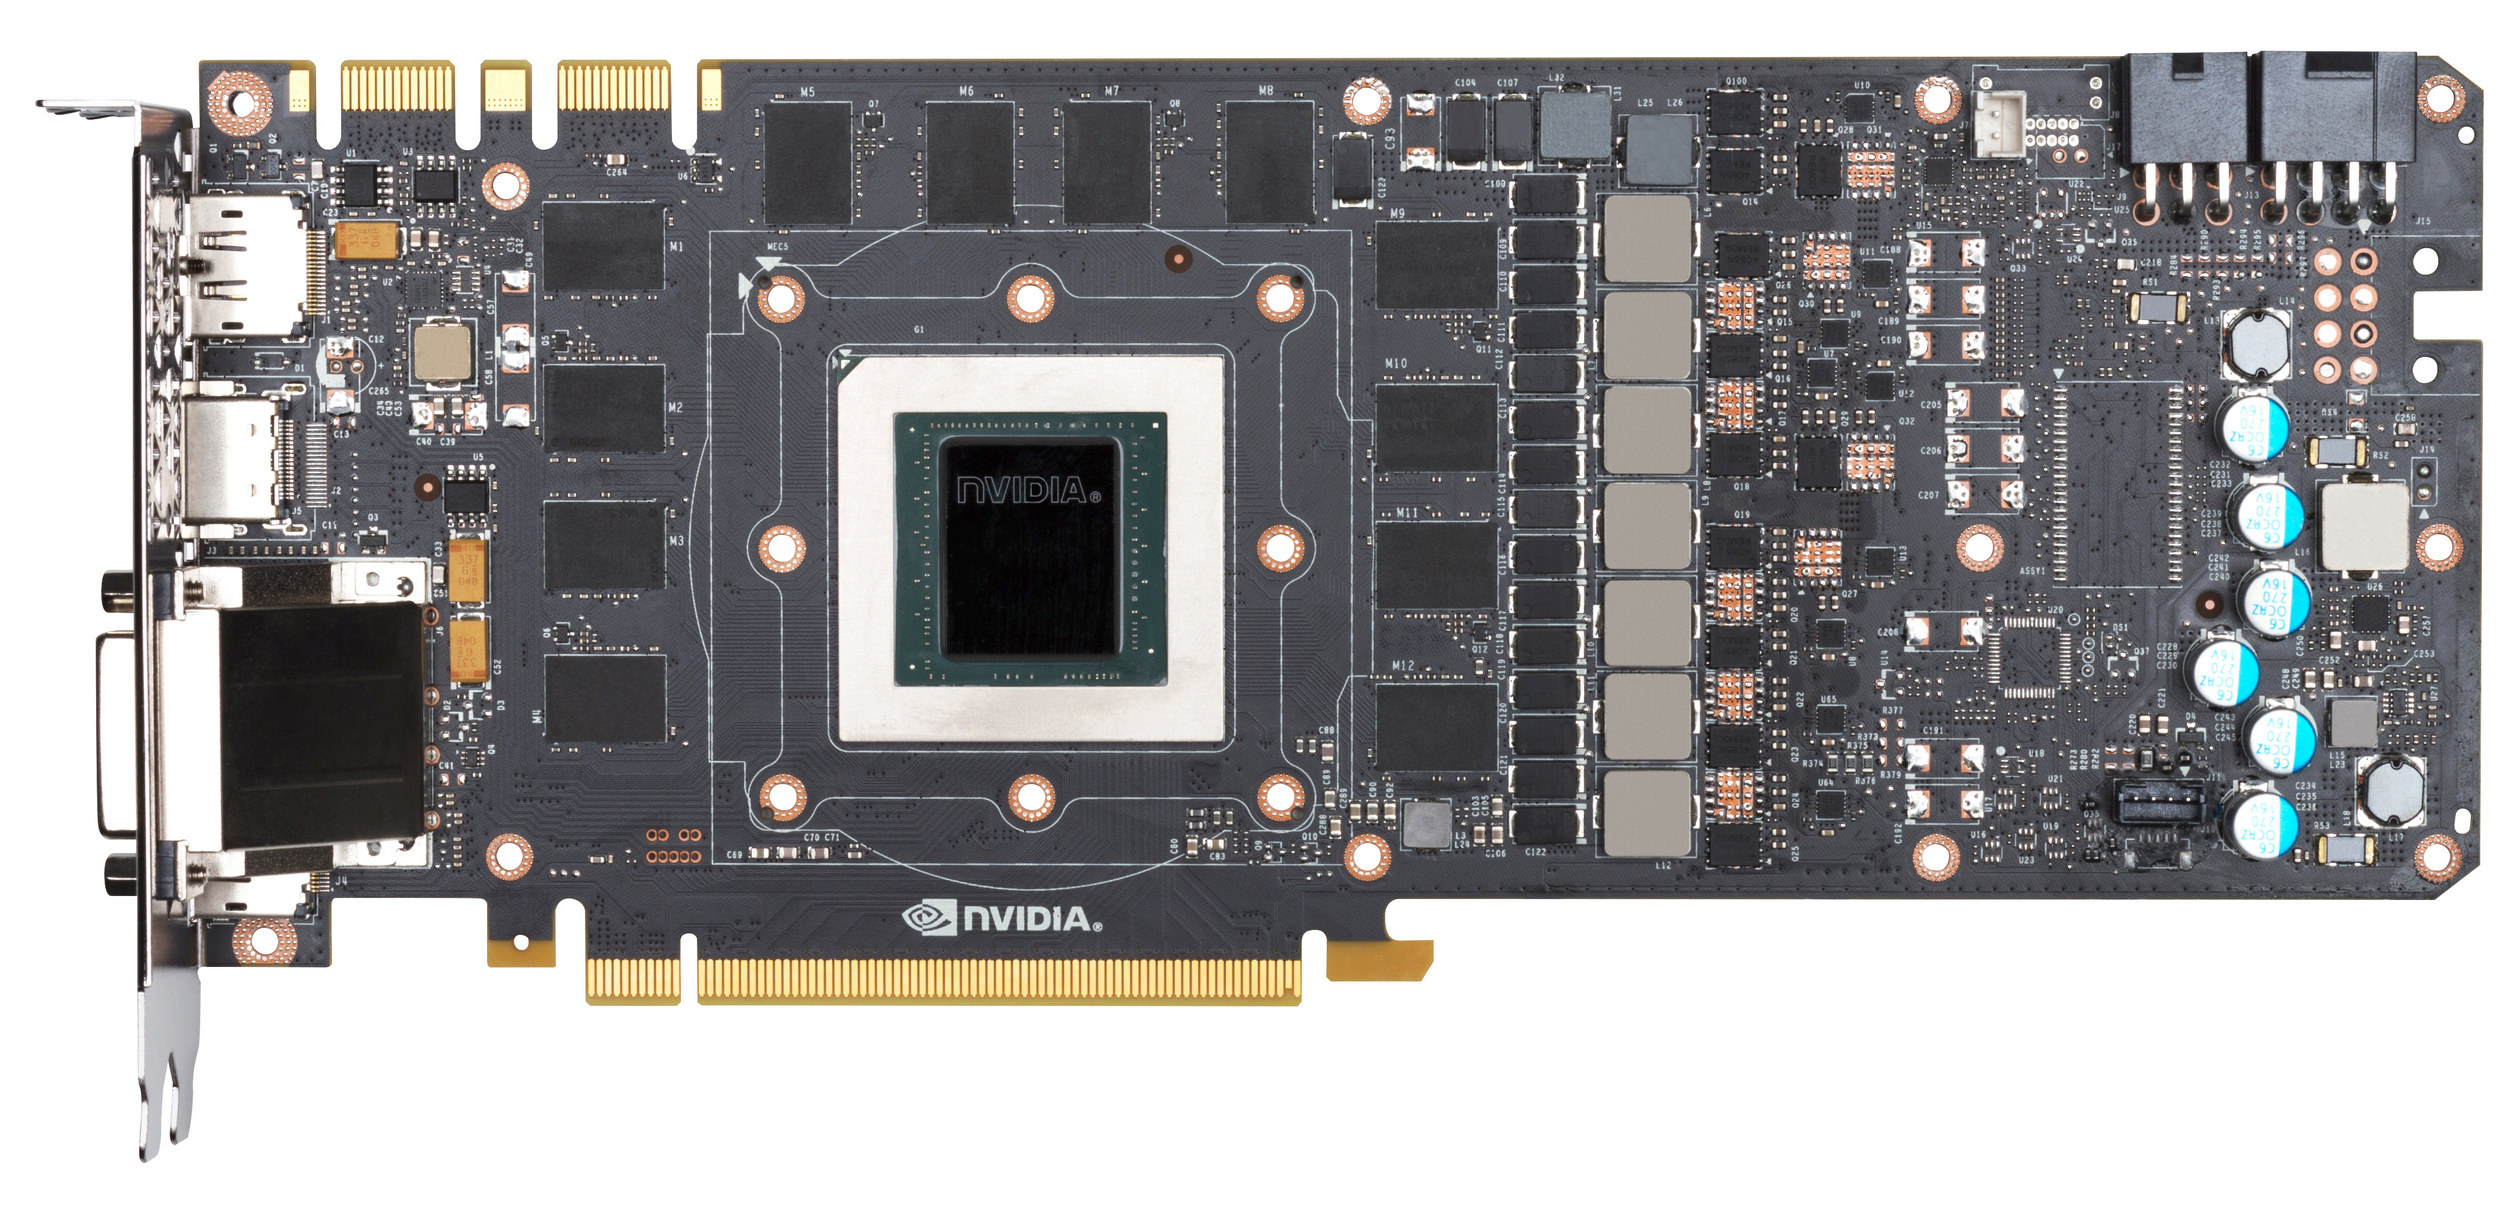 Samsung GDDR6 Memory Arriving Next Year With 16 Gbps Speeds – Designed For NVIDIA Volta Gaming GPUs and More, Receives CES 2018 Innovation Award